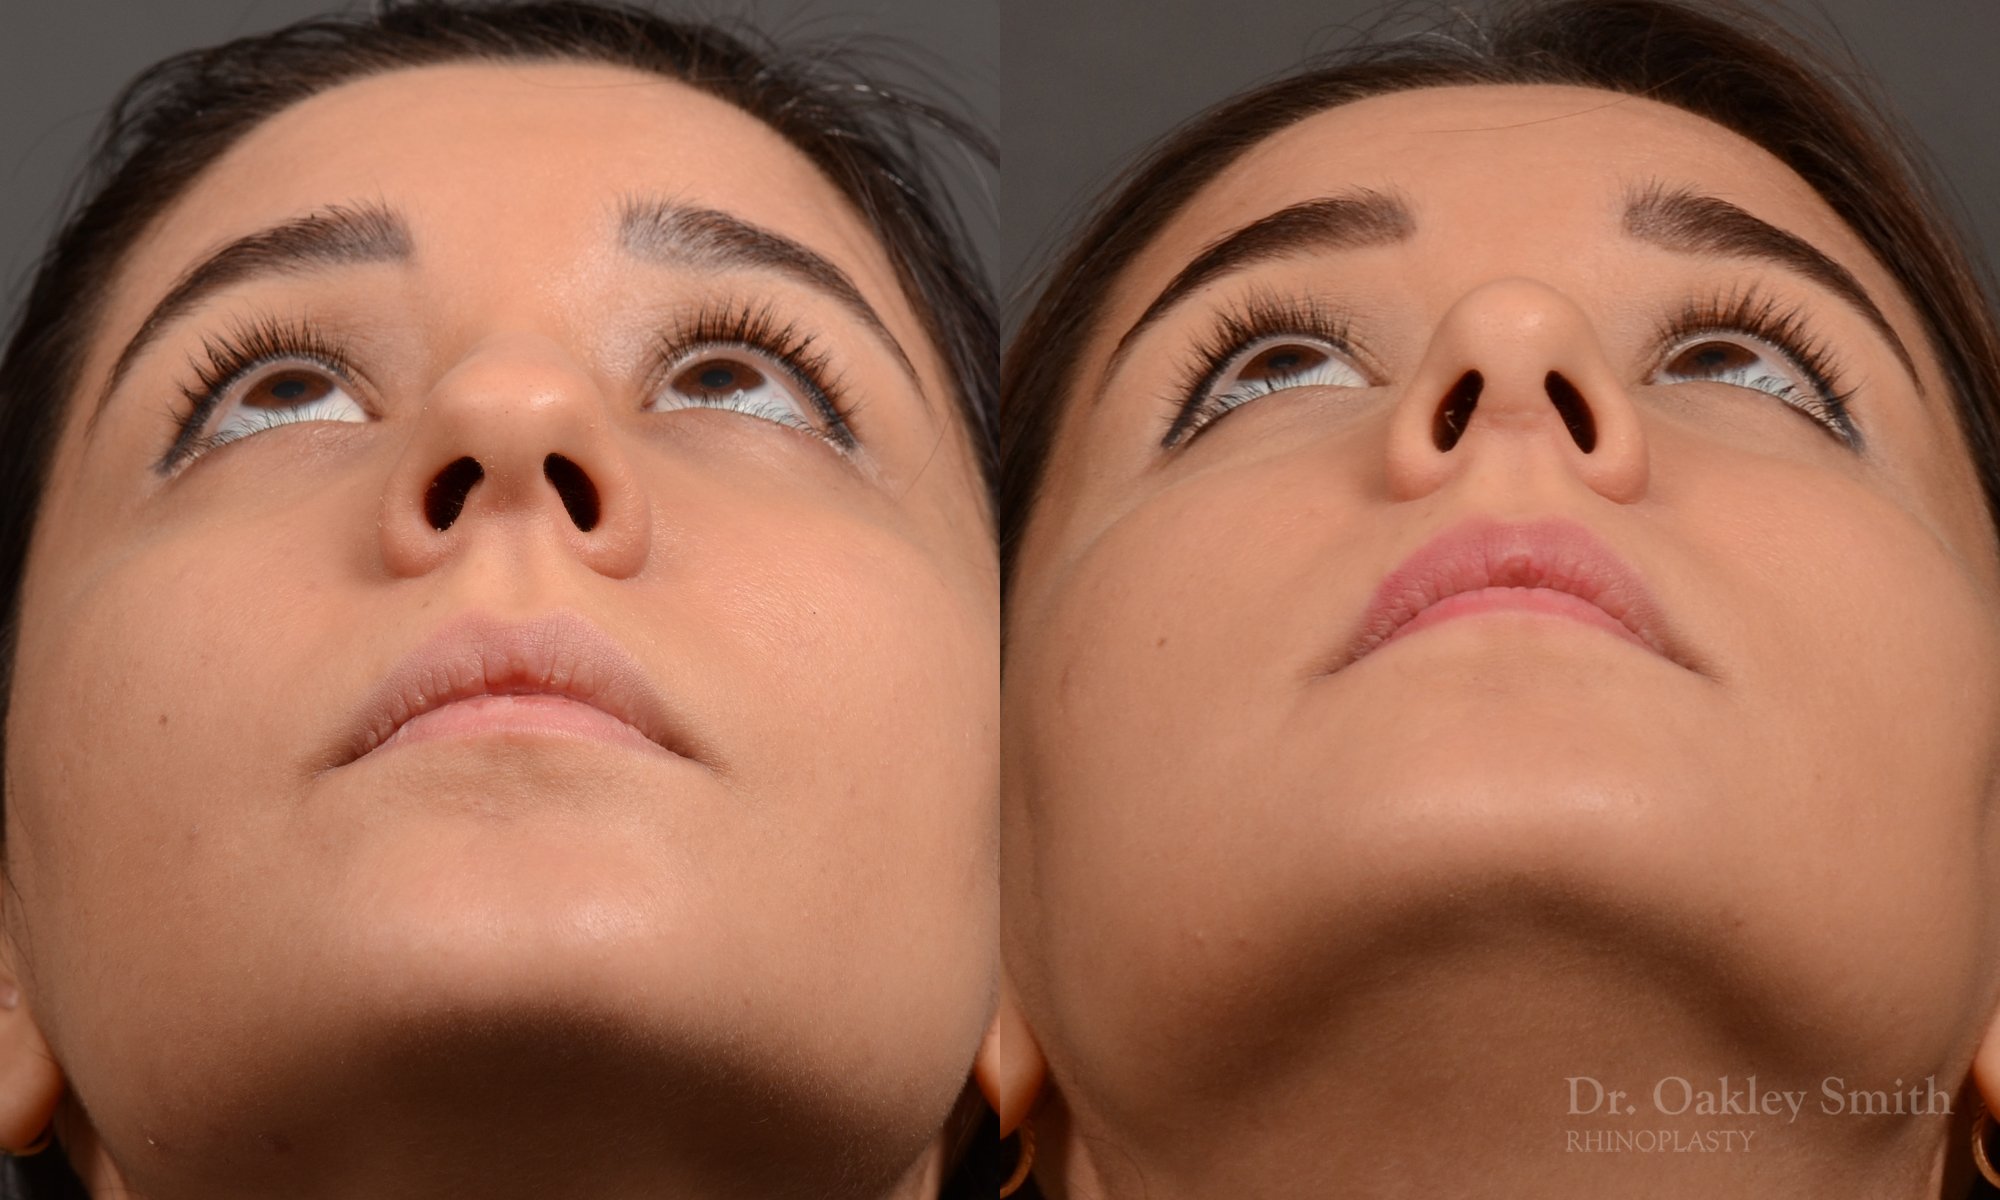 Rhinoplasty - Rhinoplasty Before and After Case 456